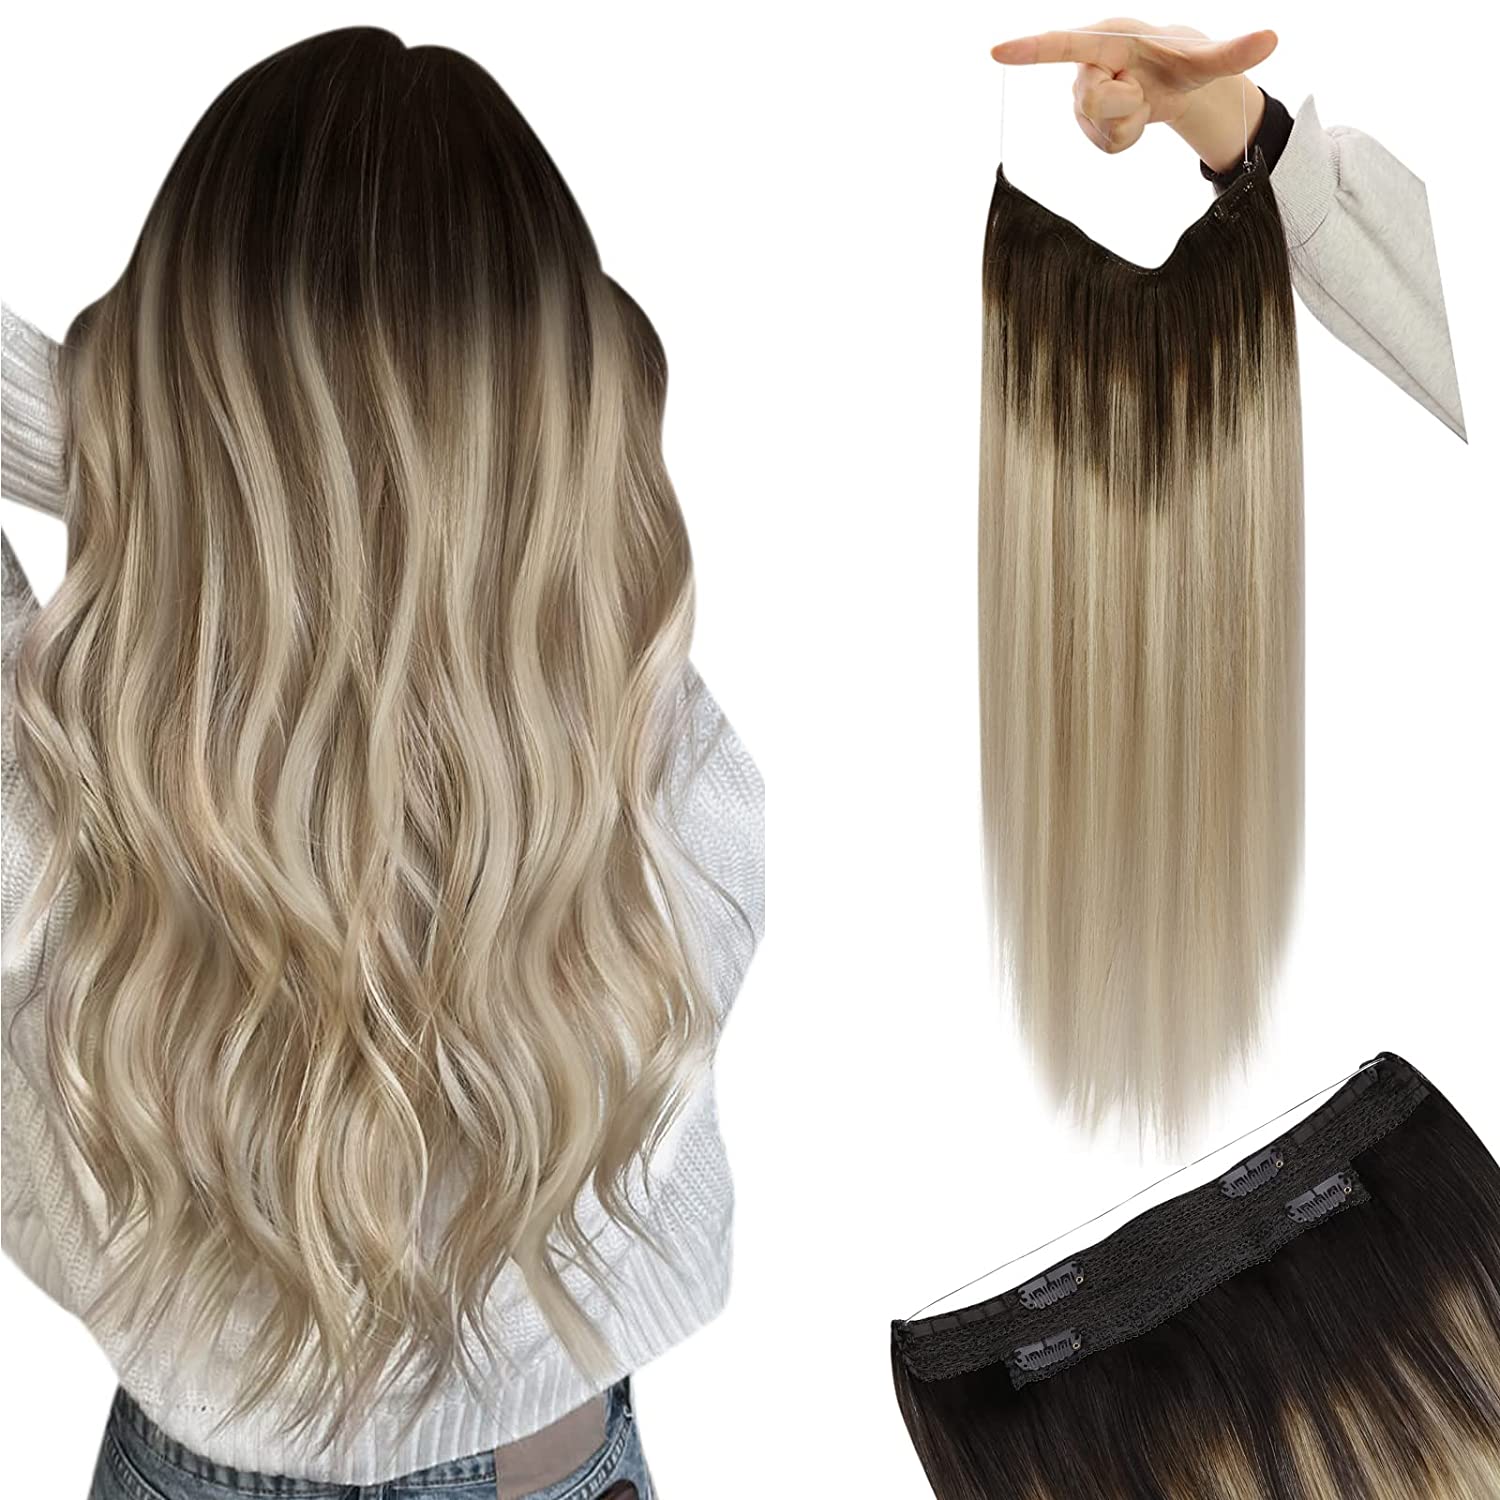 Halo Hair Extensions Fish Line Hair